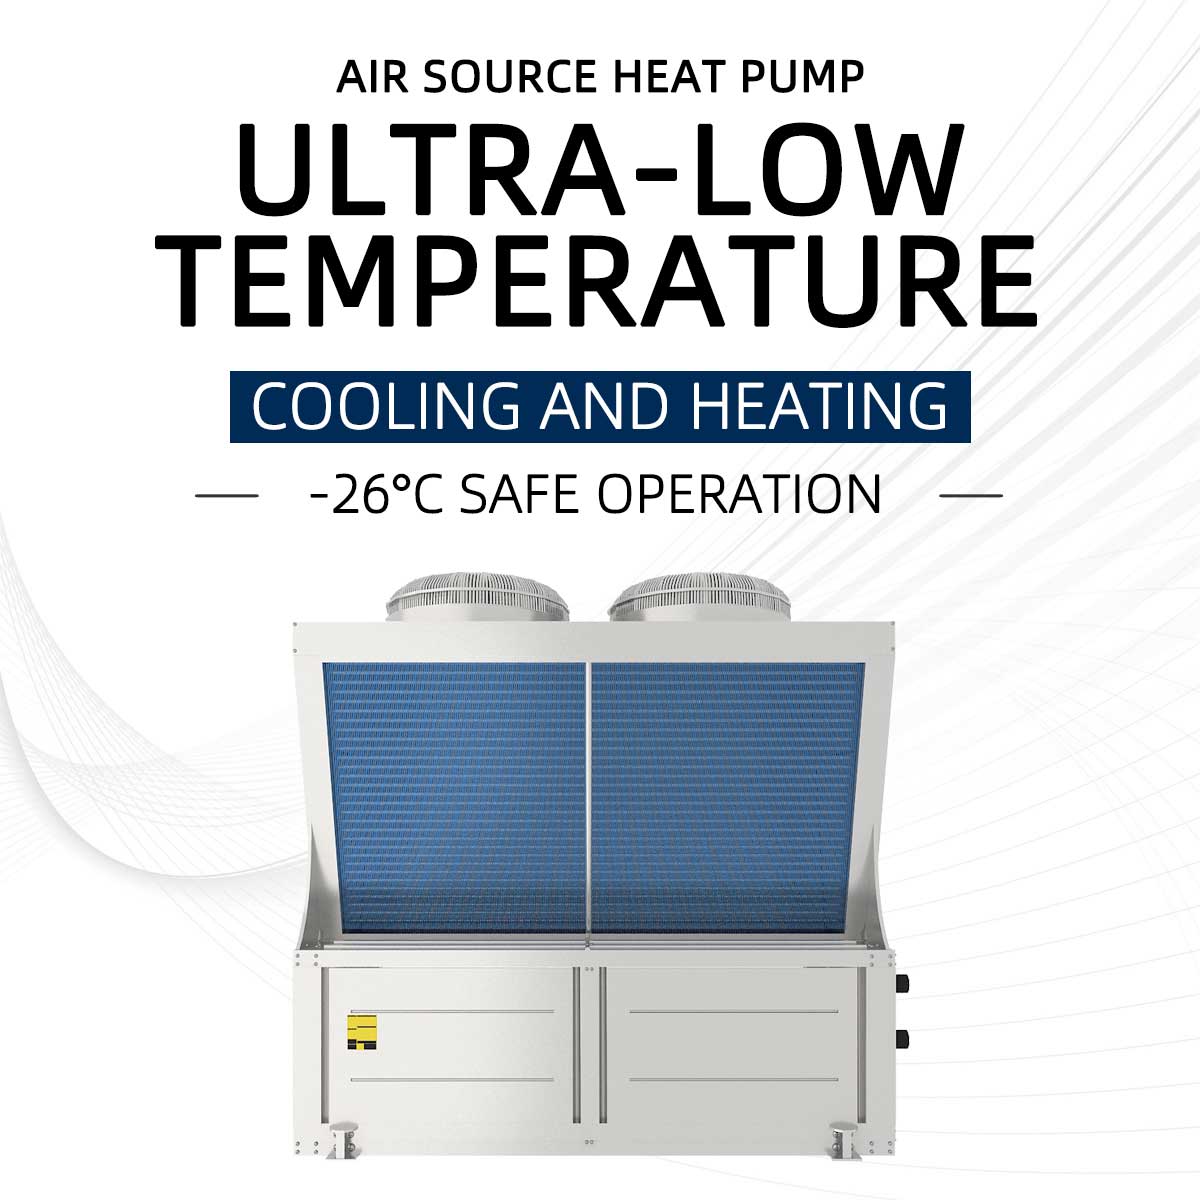 Frosting and Defrosting of air-cooled heat pump